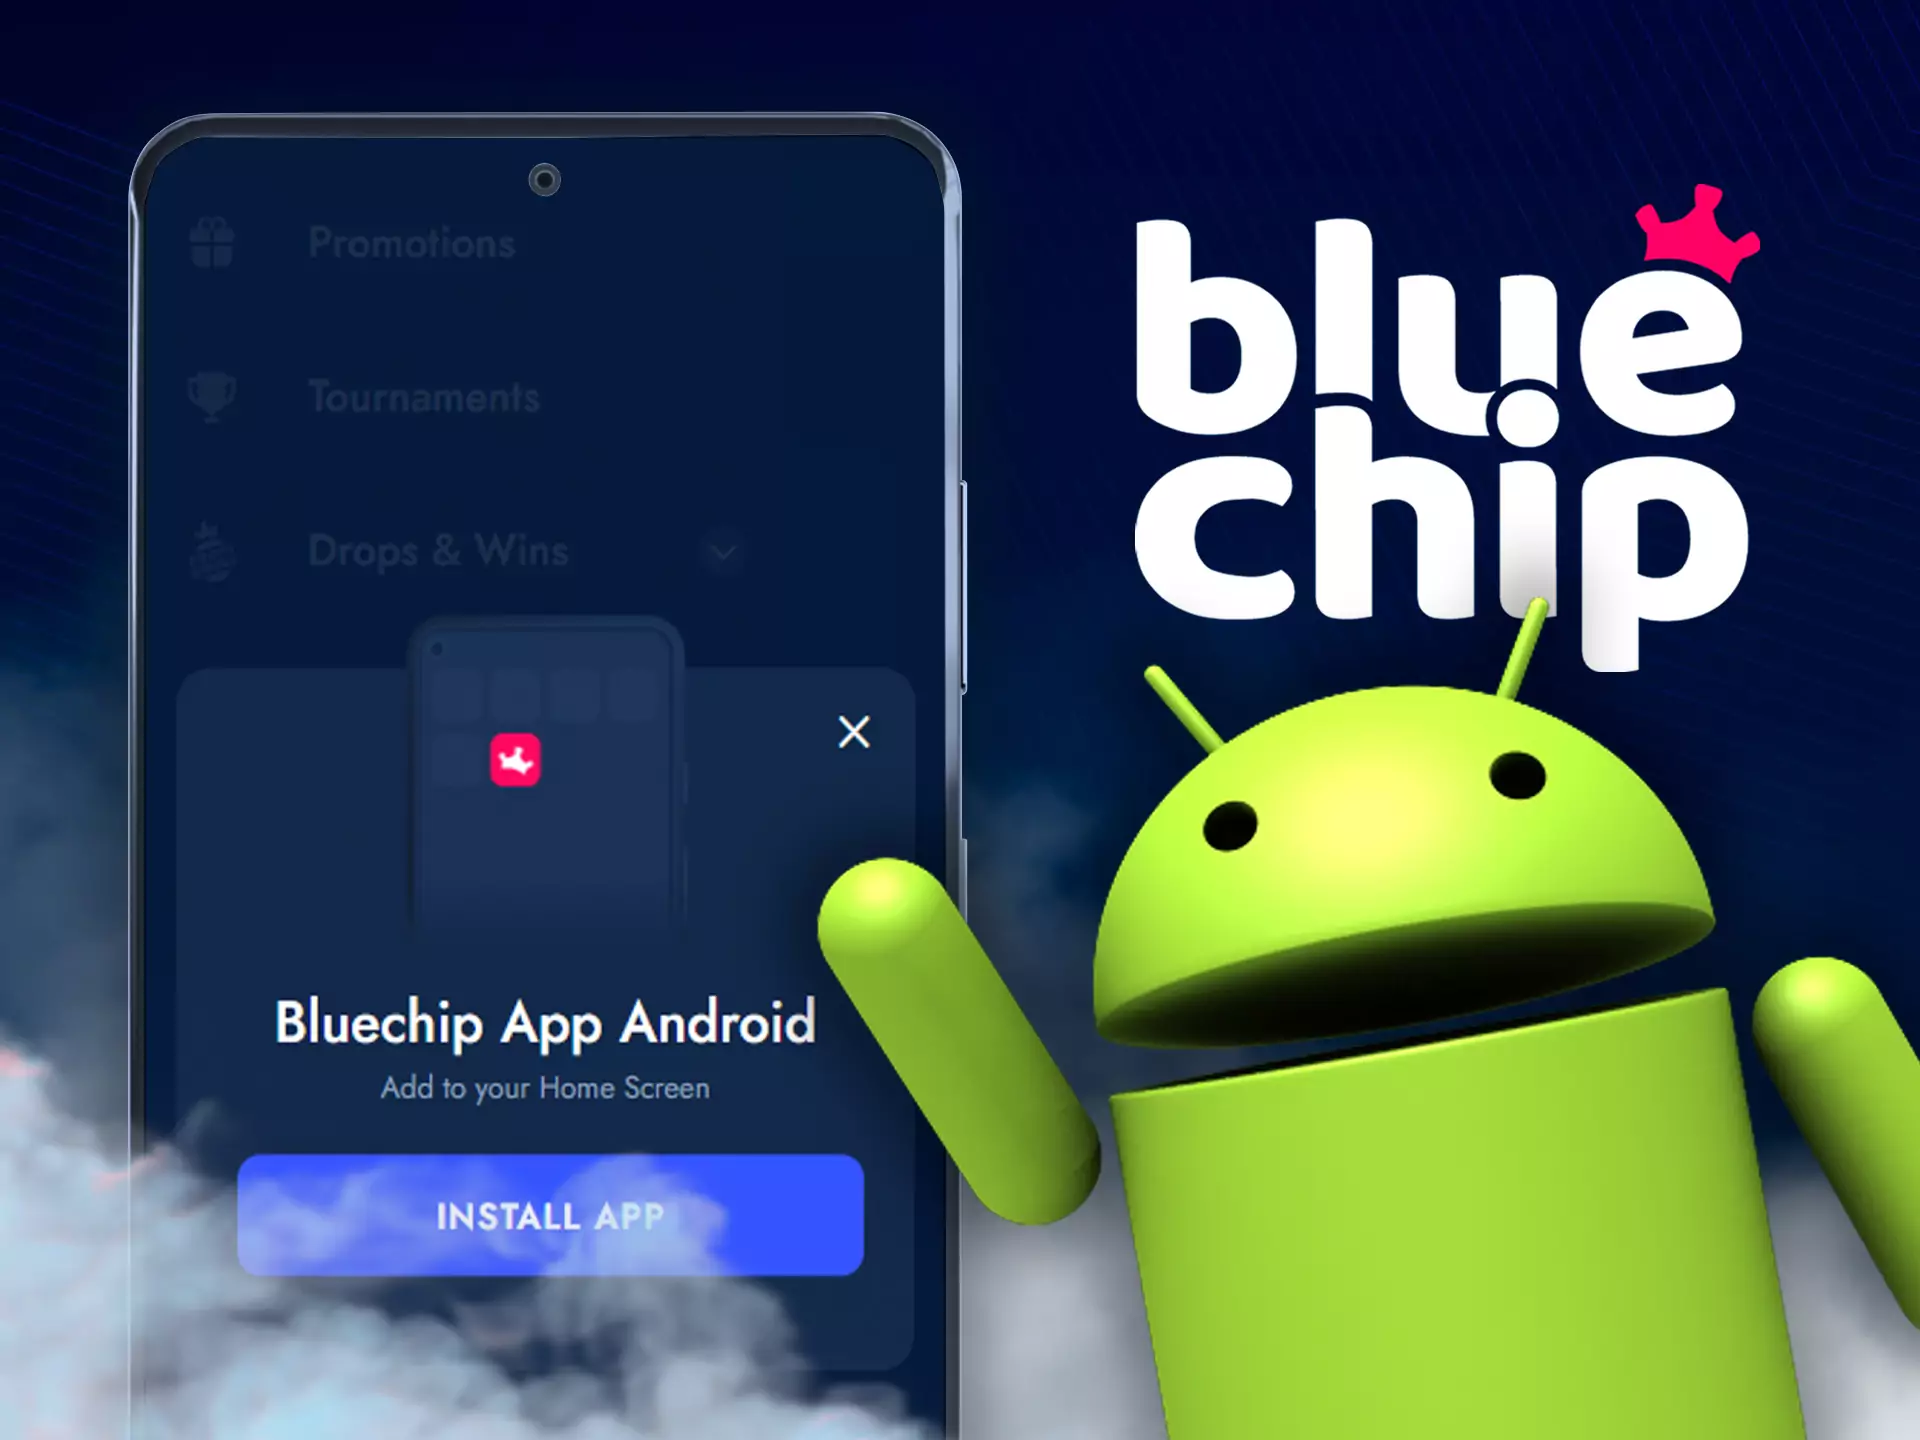 The Bluechip app for Android devices should be downloaded from the official website.